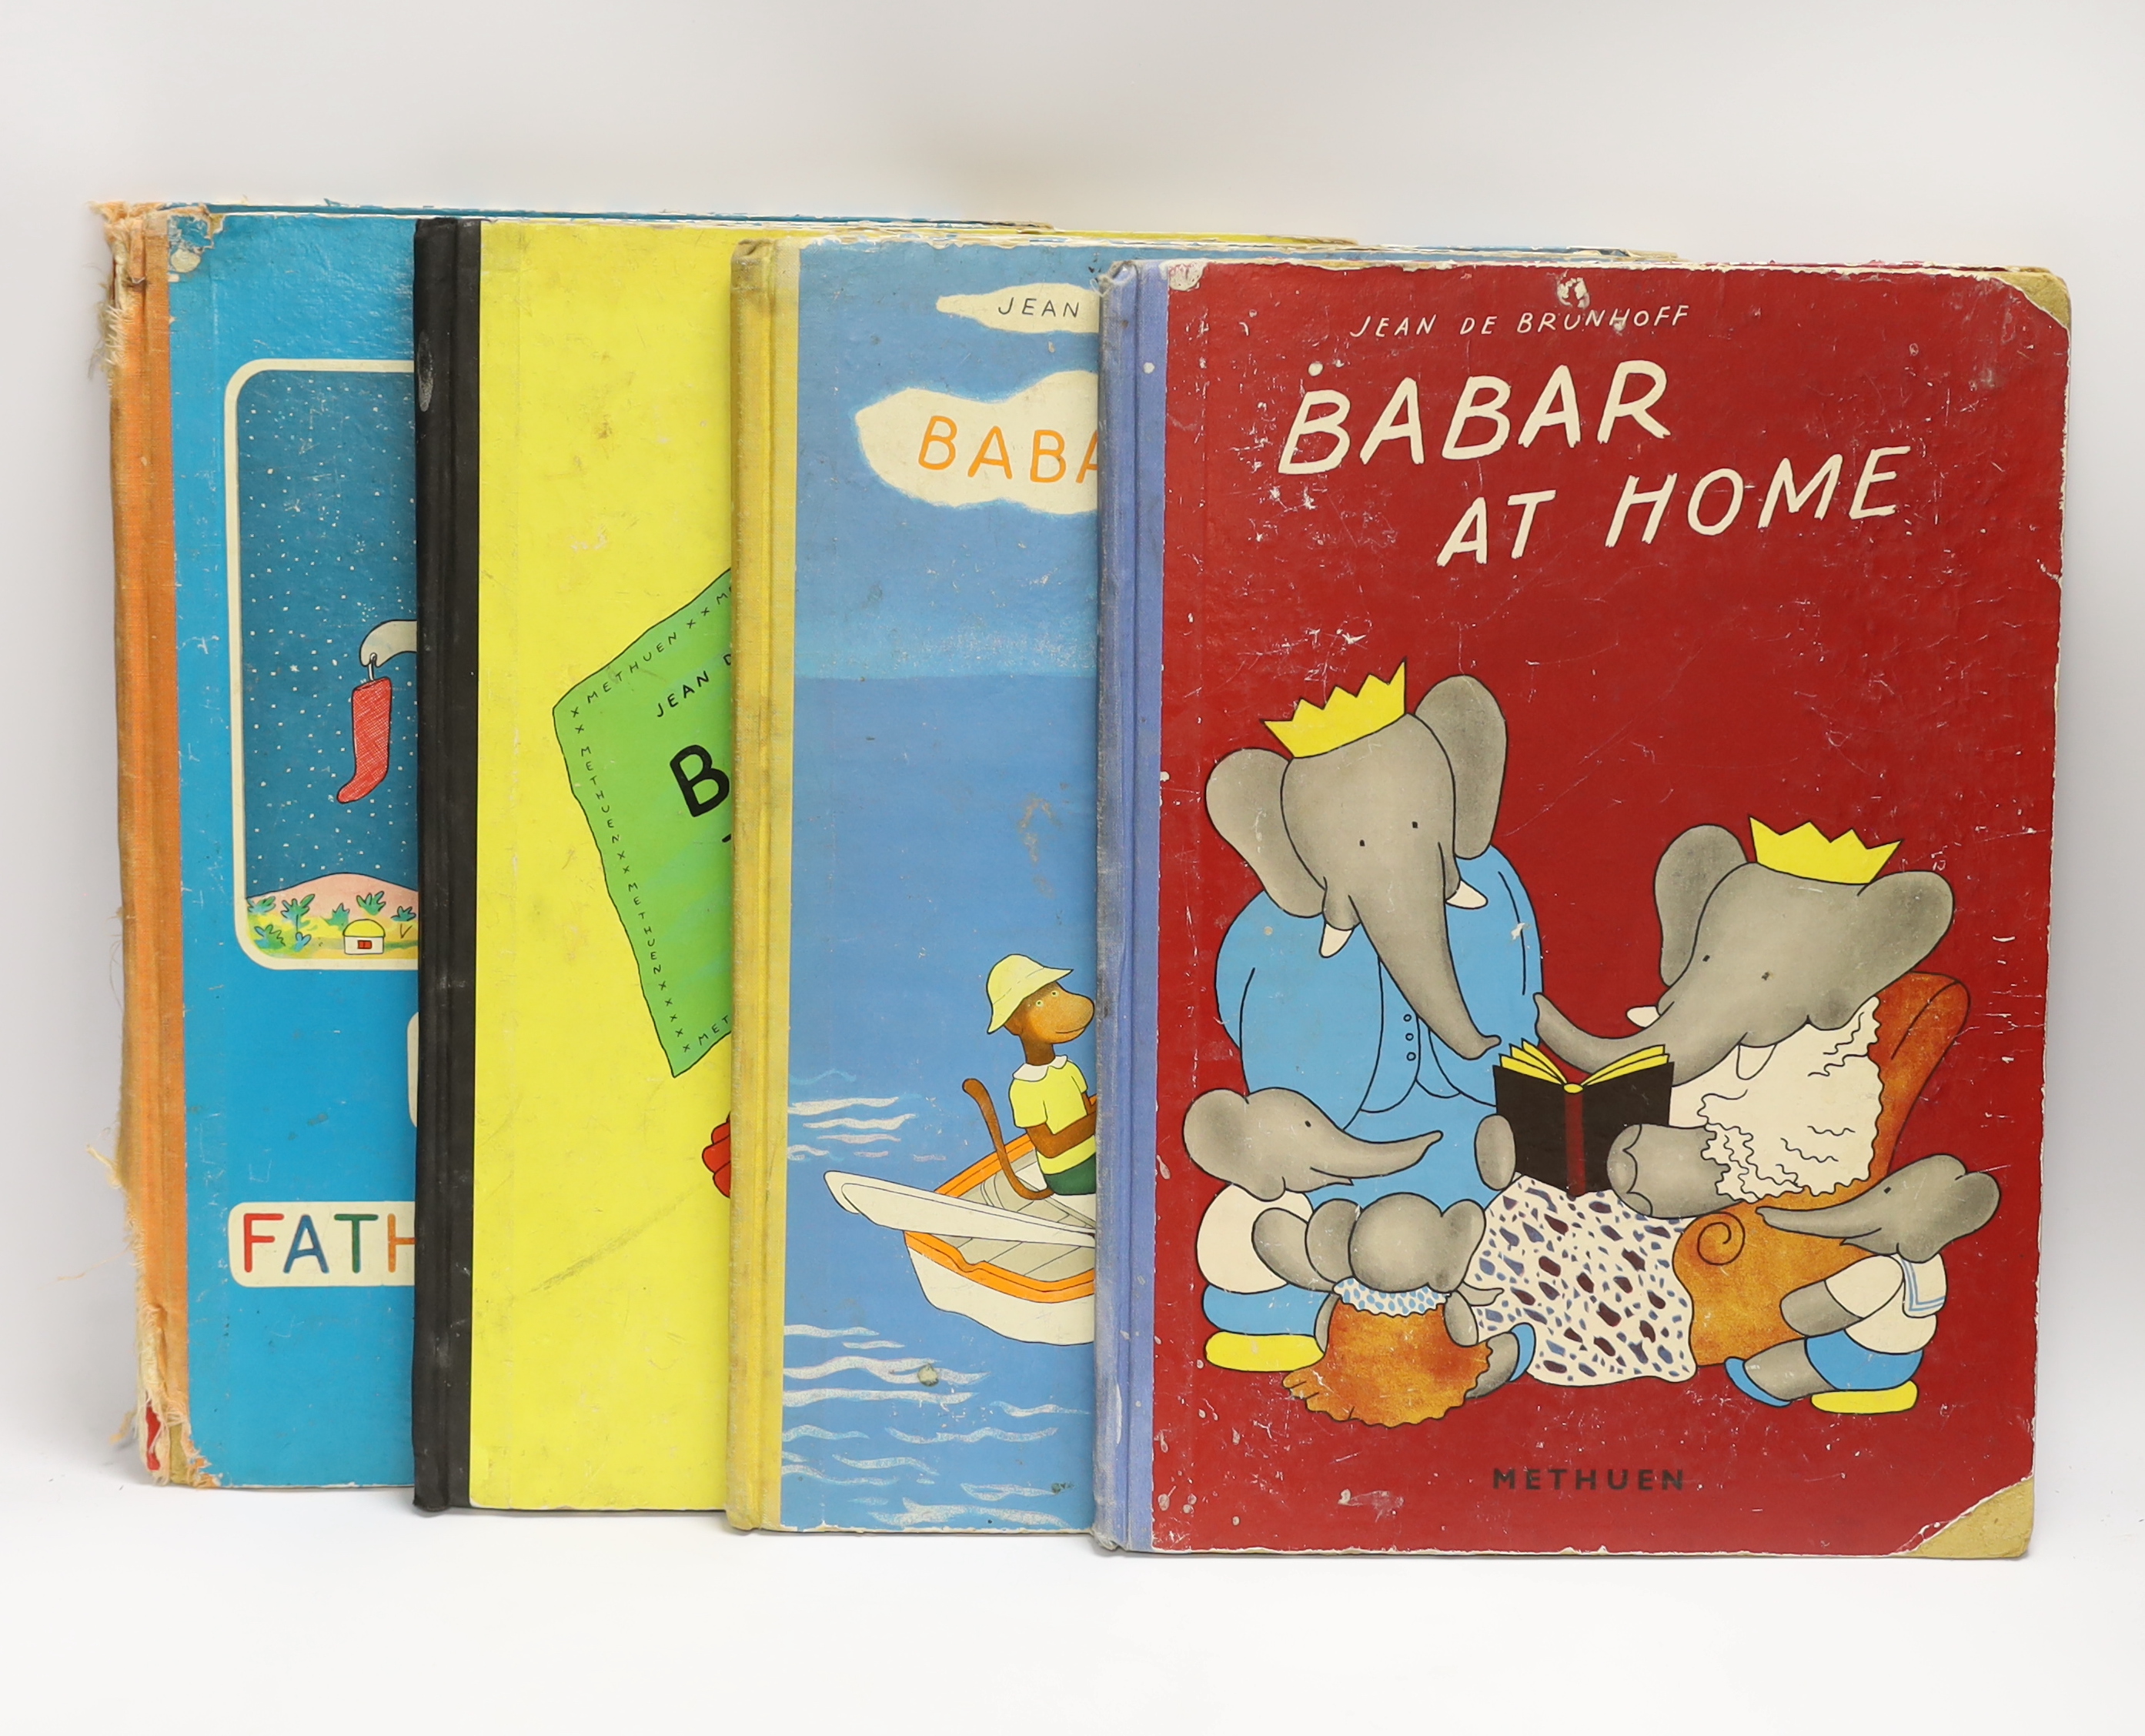 Books: Babar's Friend Zephir, 1937, Babar at Home, 1938, Babar the king, 1936 Babar and Father Christmas, 1940                                                                                                              